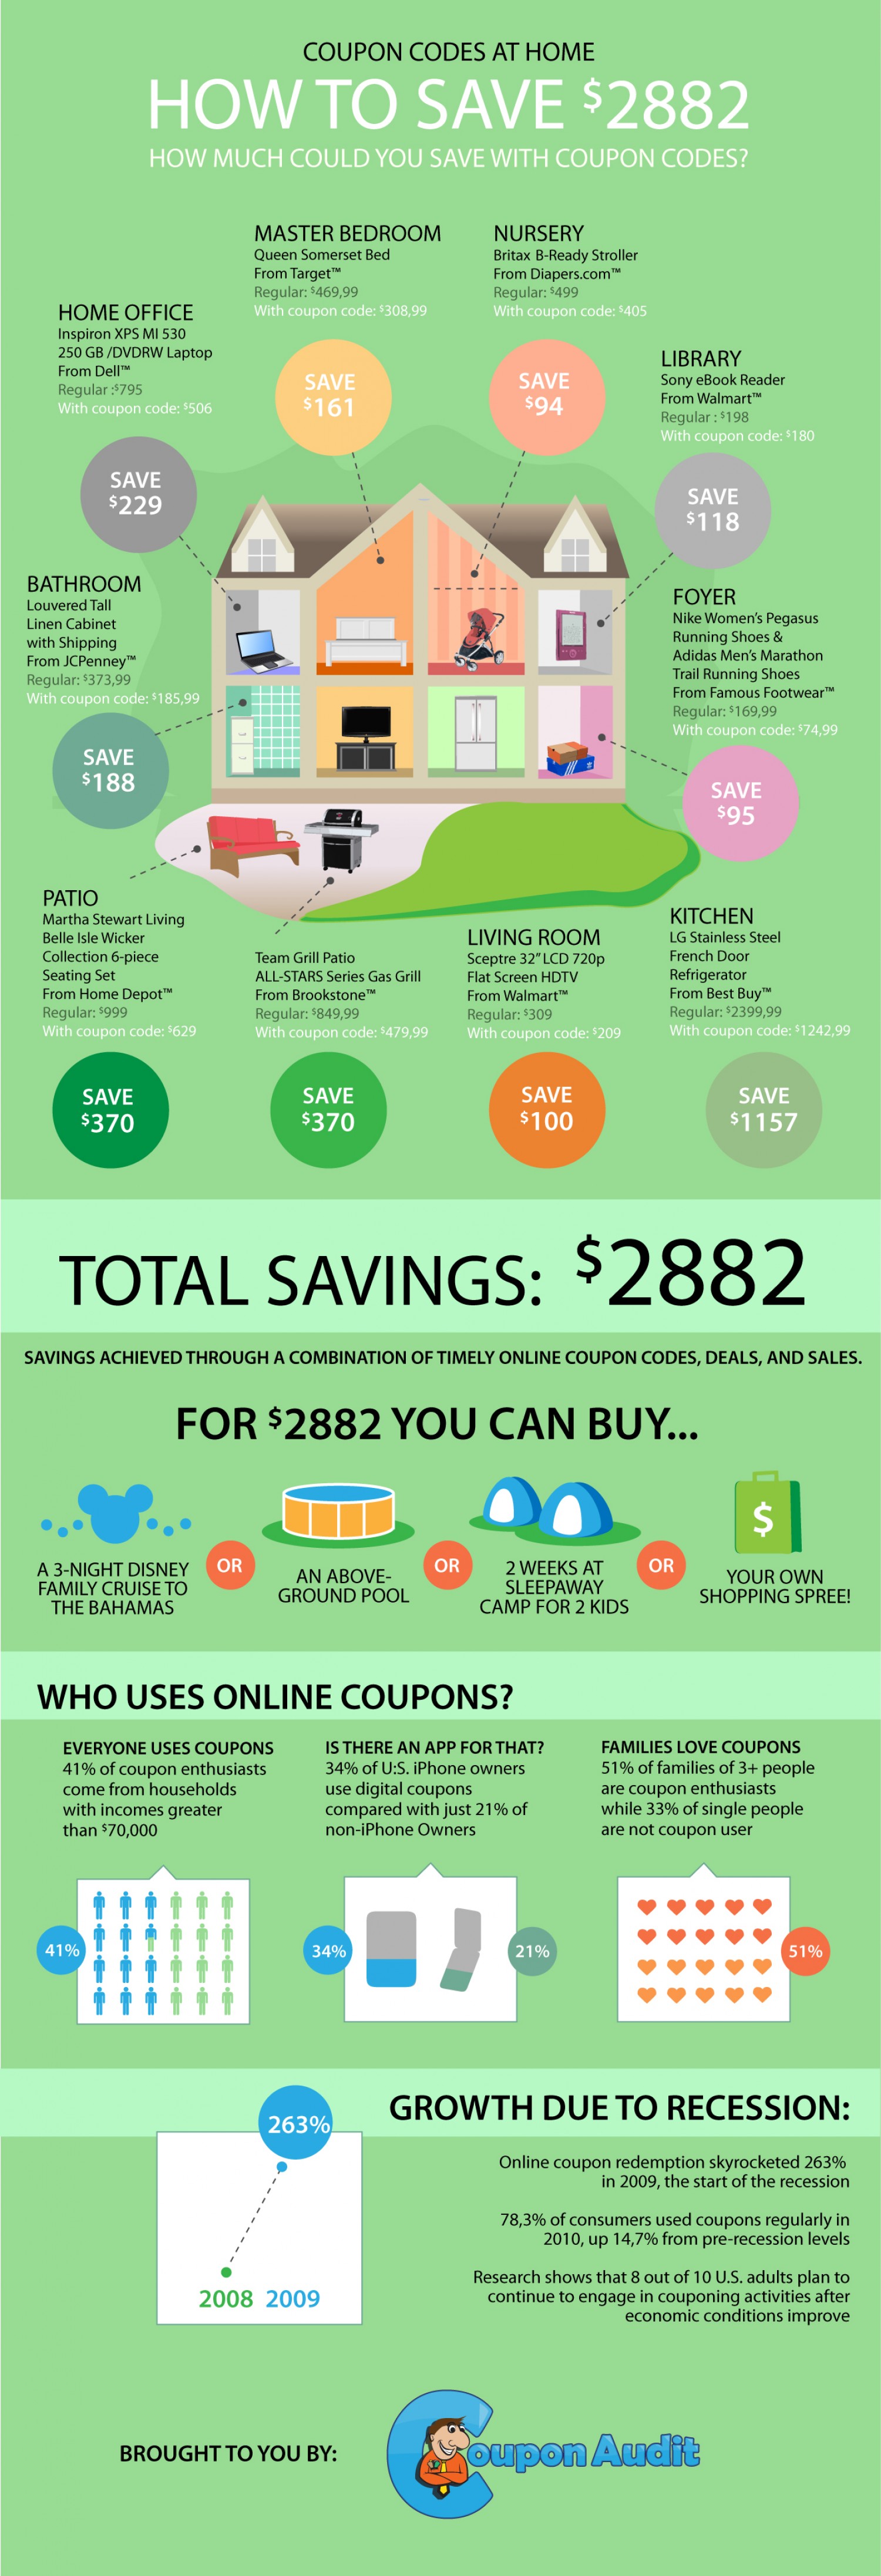 How To Save $2,882 By Using Coupons